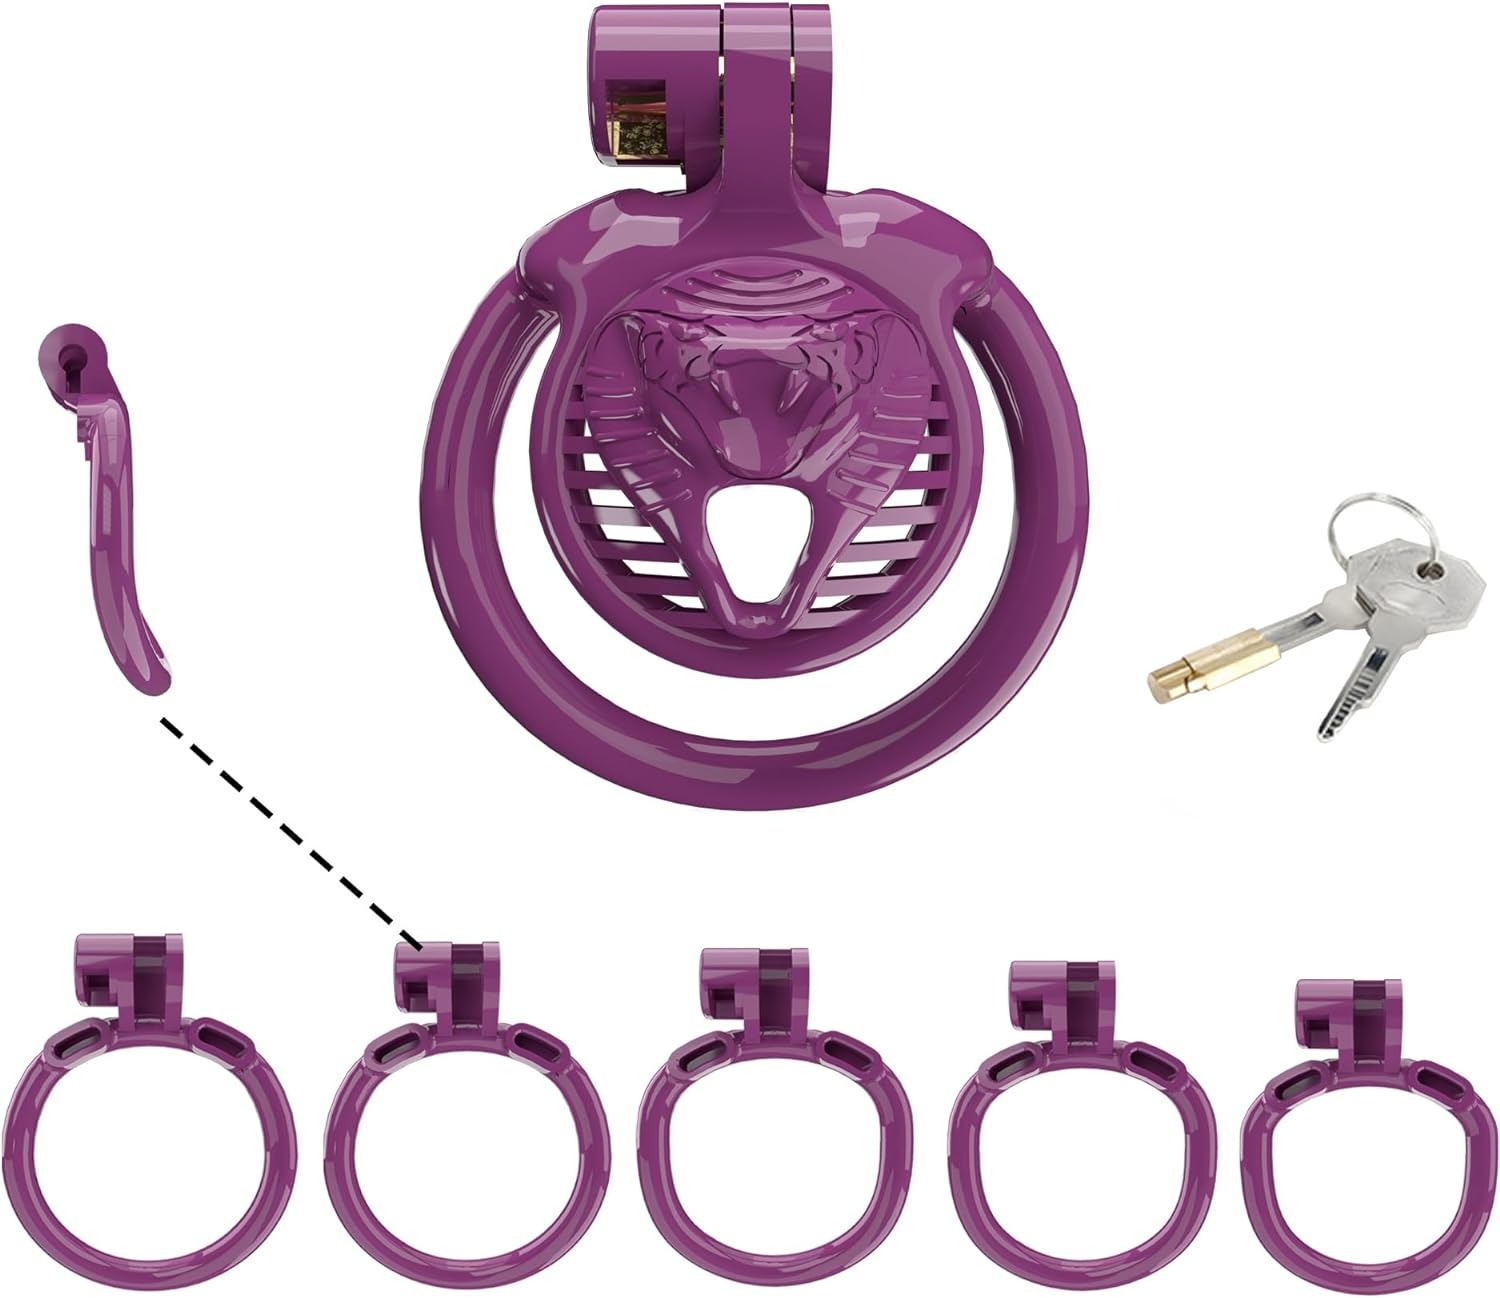 Sissy Chastity Cage for Men Purple Chastity Devices Lock Design Small Chastity Cage Male Penis Cage Cock Cage BDSM Toys for Couples Sex Purple WX-4